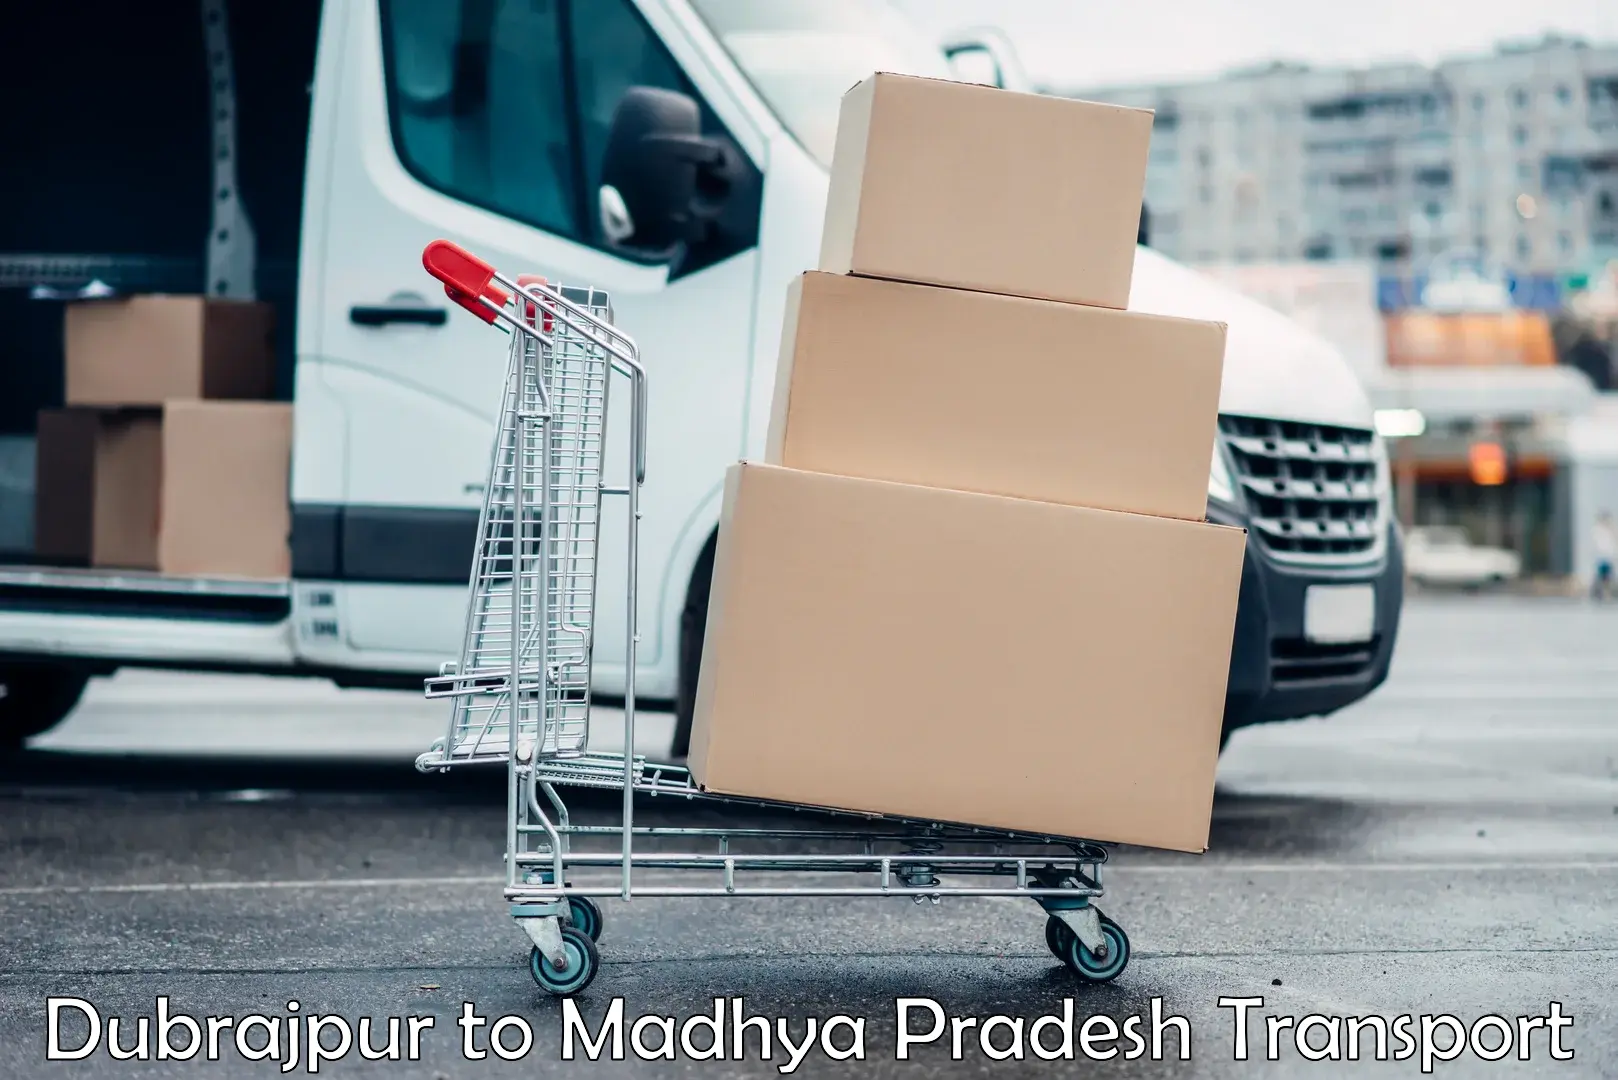 Goods delivery service Dubrajpur to Mandideep